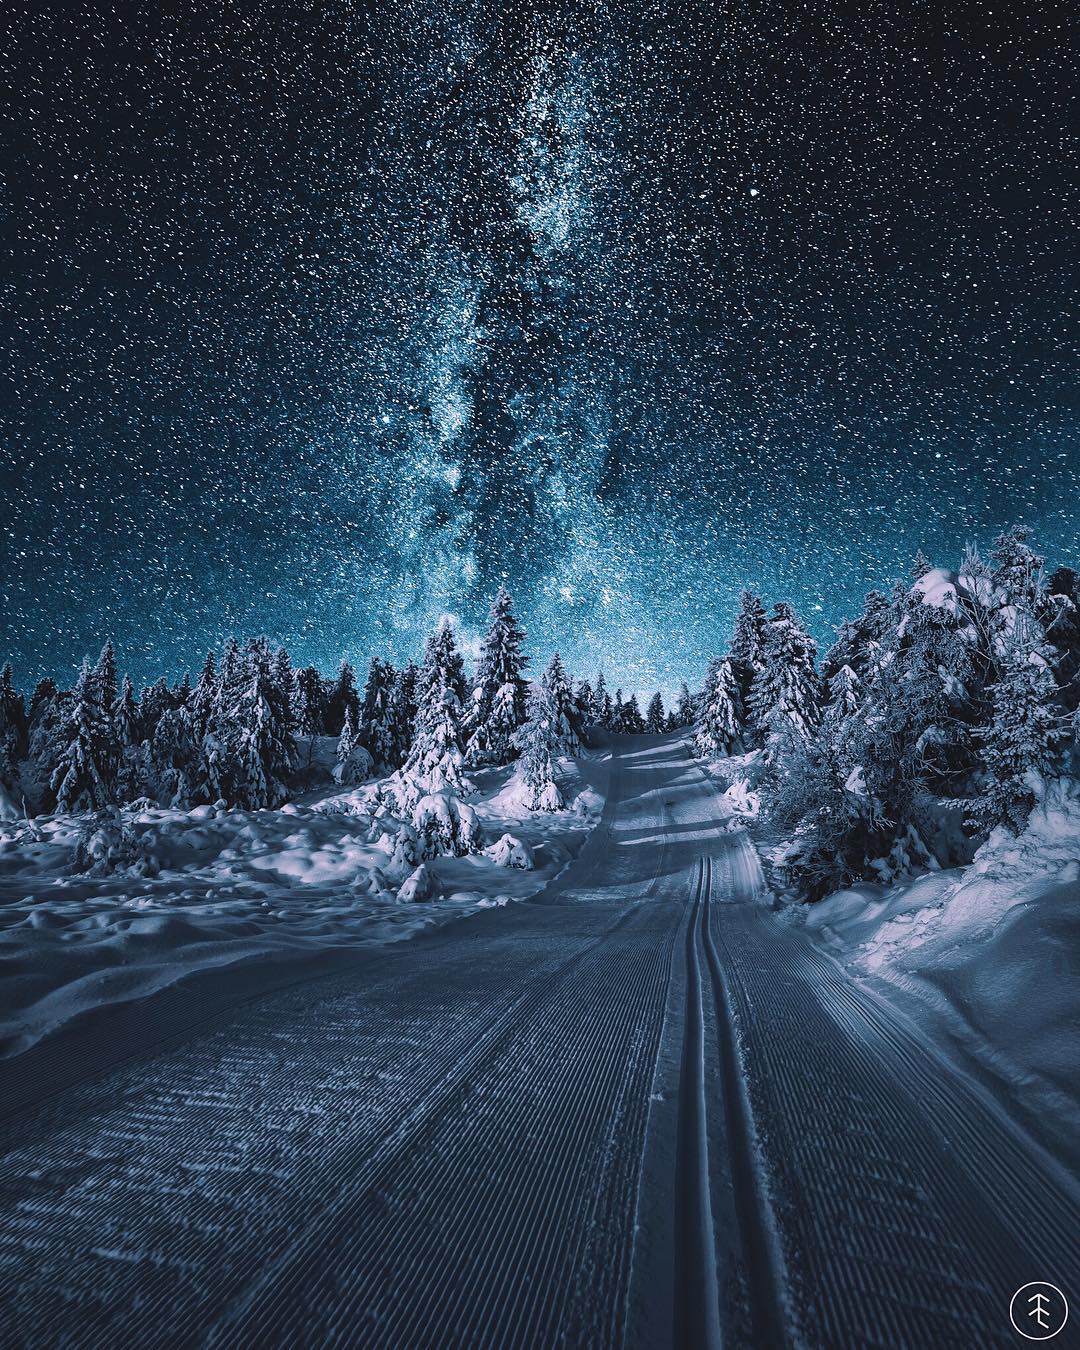 A clear, starry night in Norway